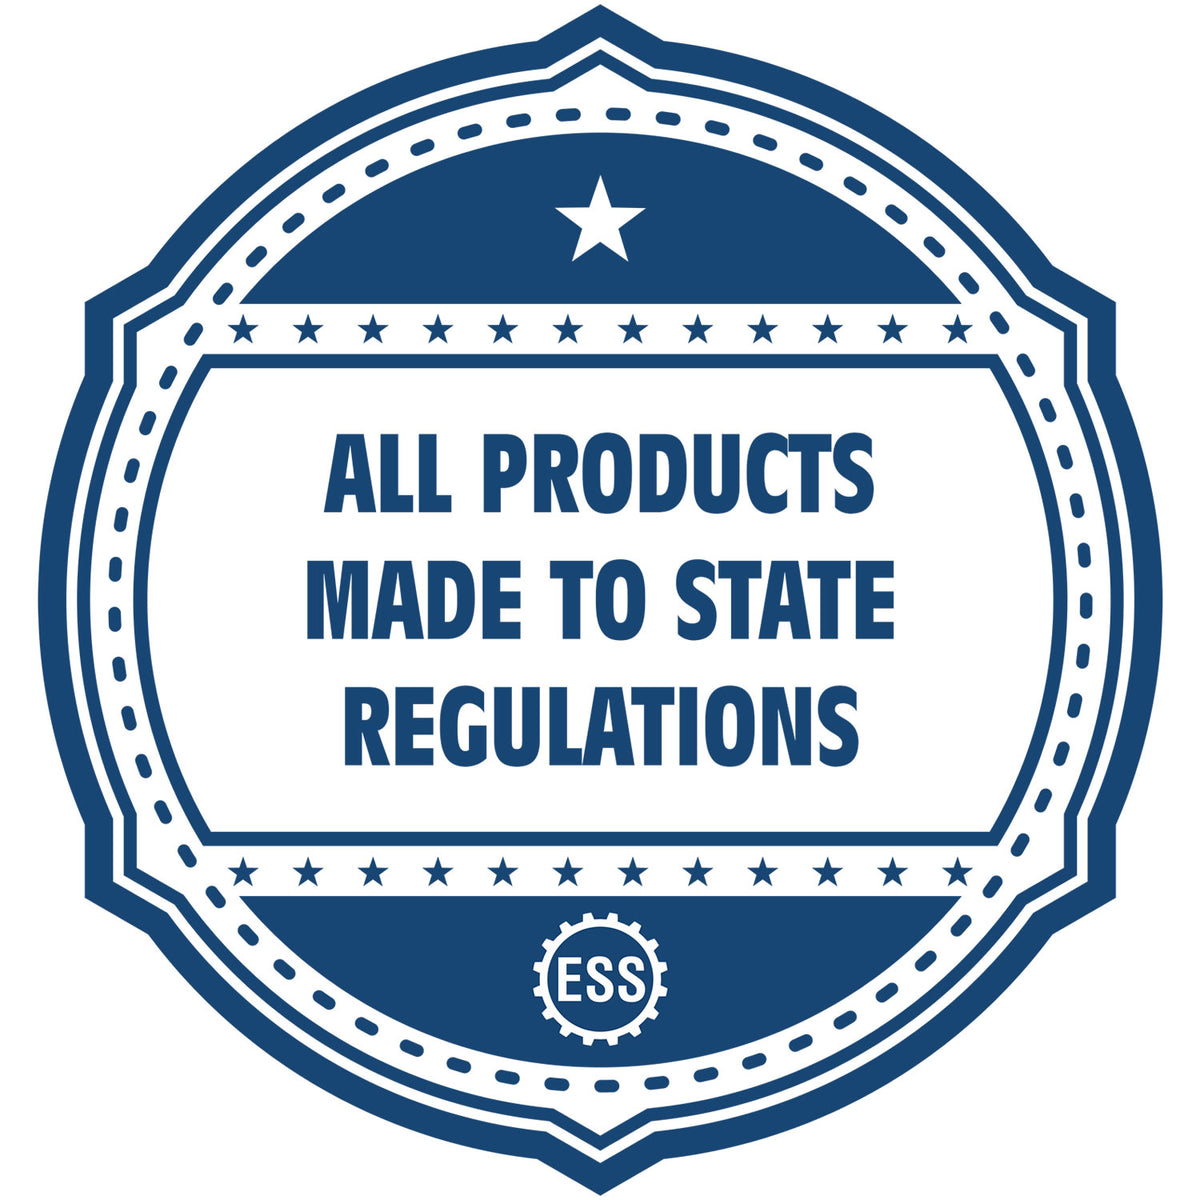 An icon or badge element for the Wooden Handle North Dakota Rectangular Notary Public Stamp showing that this product is made in compliance with state regulations.